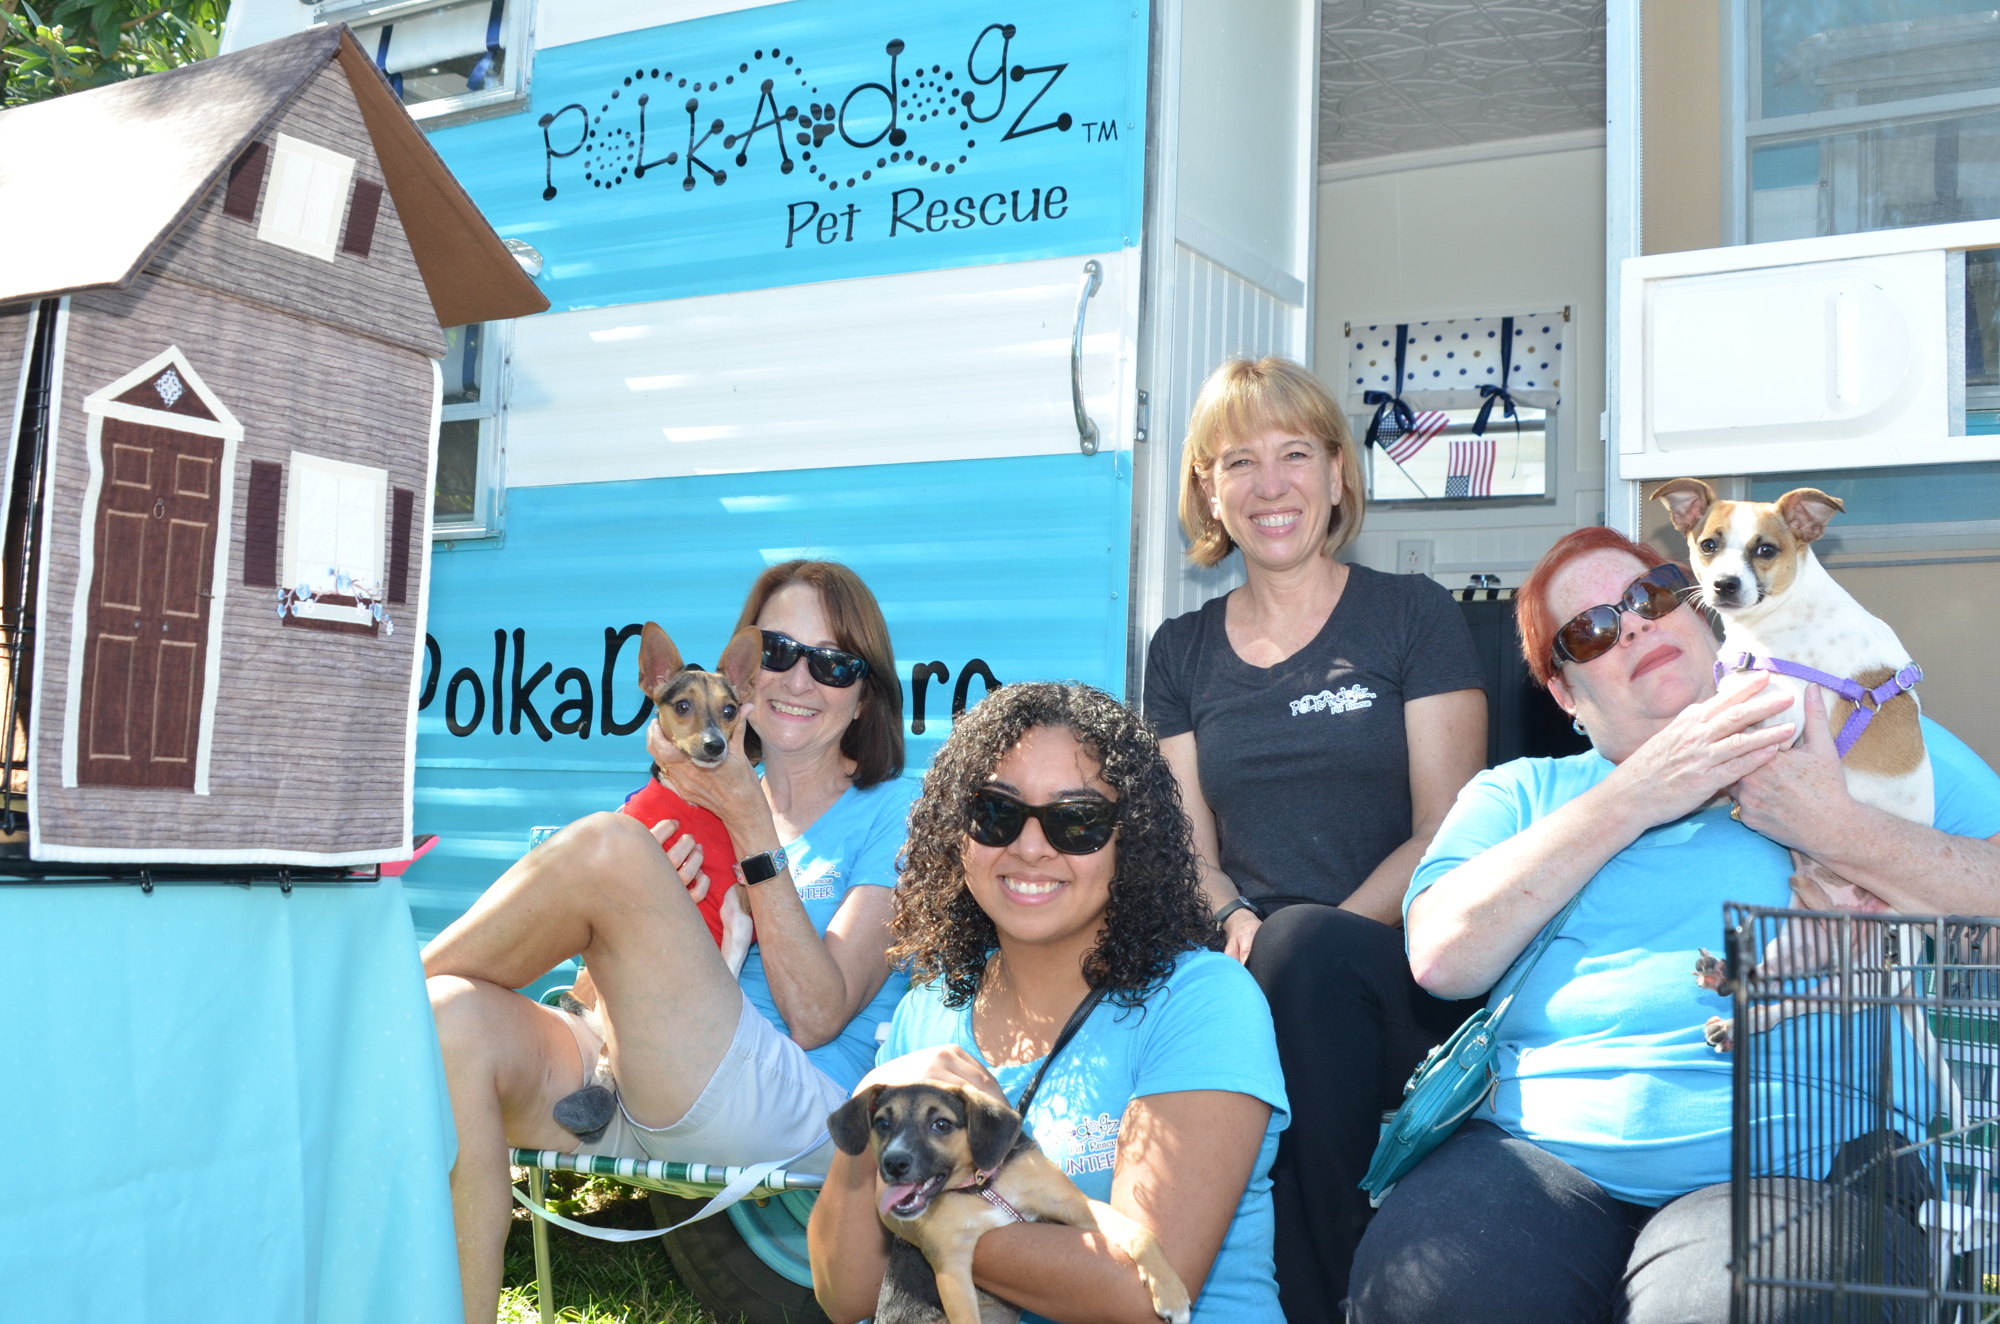 Polka-dogz Pet Rescue brought several of its adoptable pets to the Gracie's anniversary event: Denise Tutas, left, with Goose; Heidi Hardman; Ashley Trigueros with Rosetta; and Ellen Winter with Maverick.